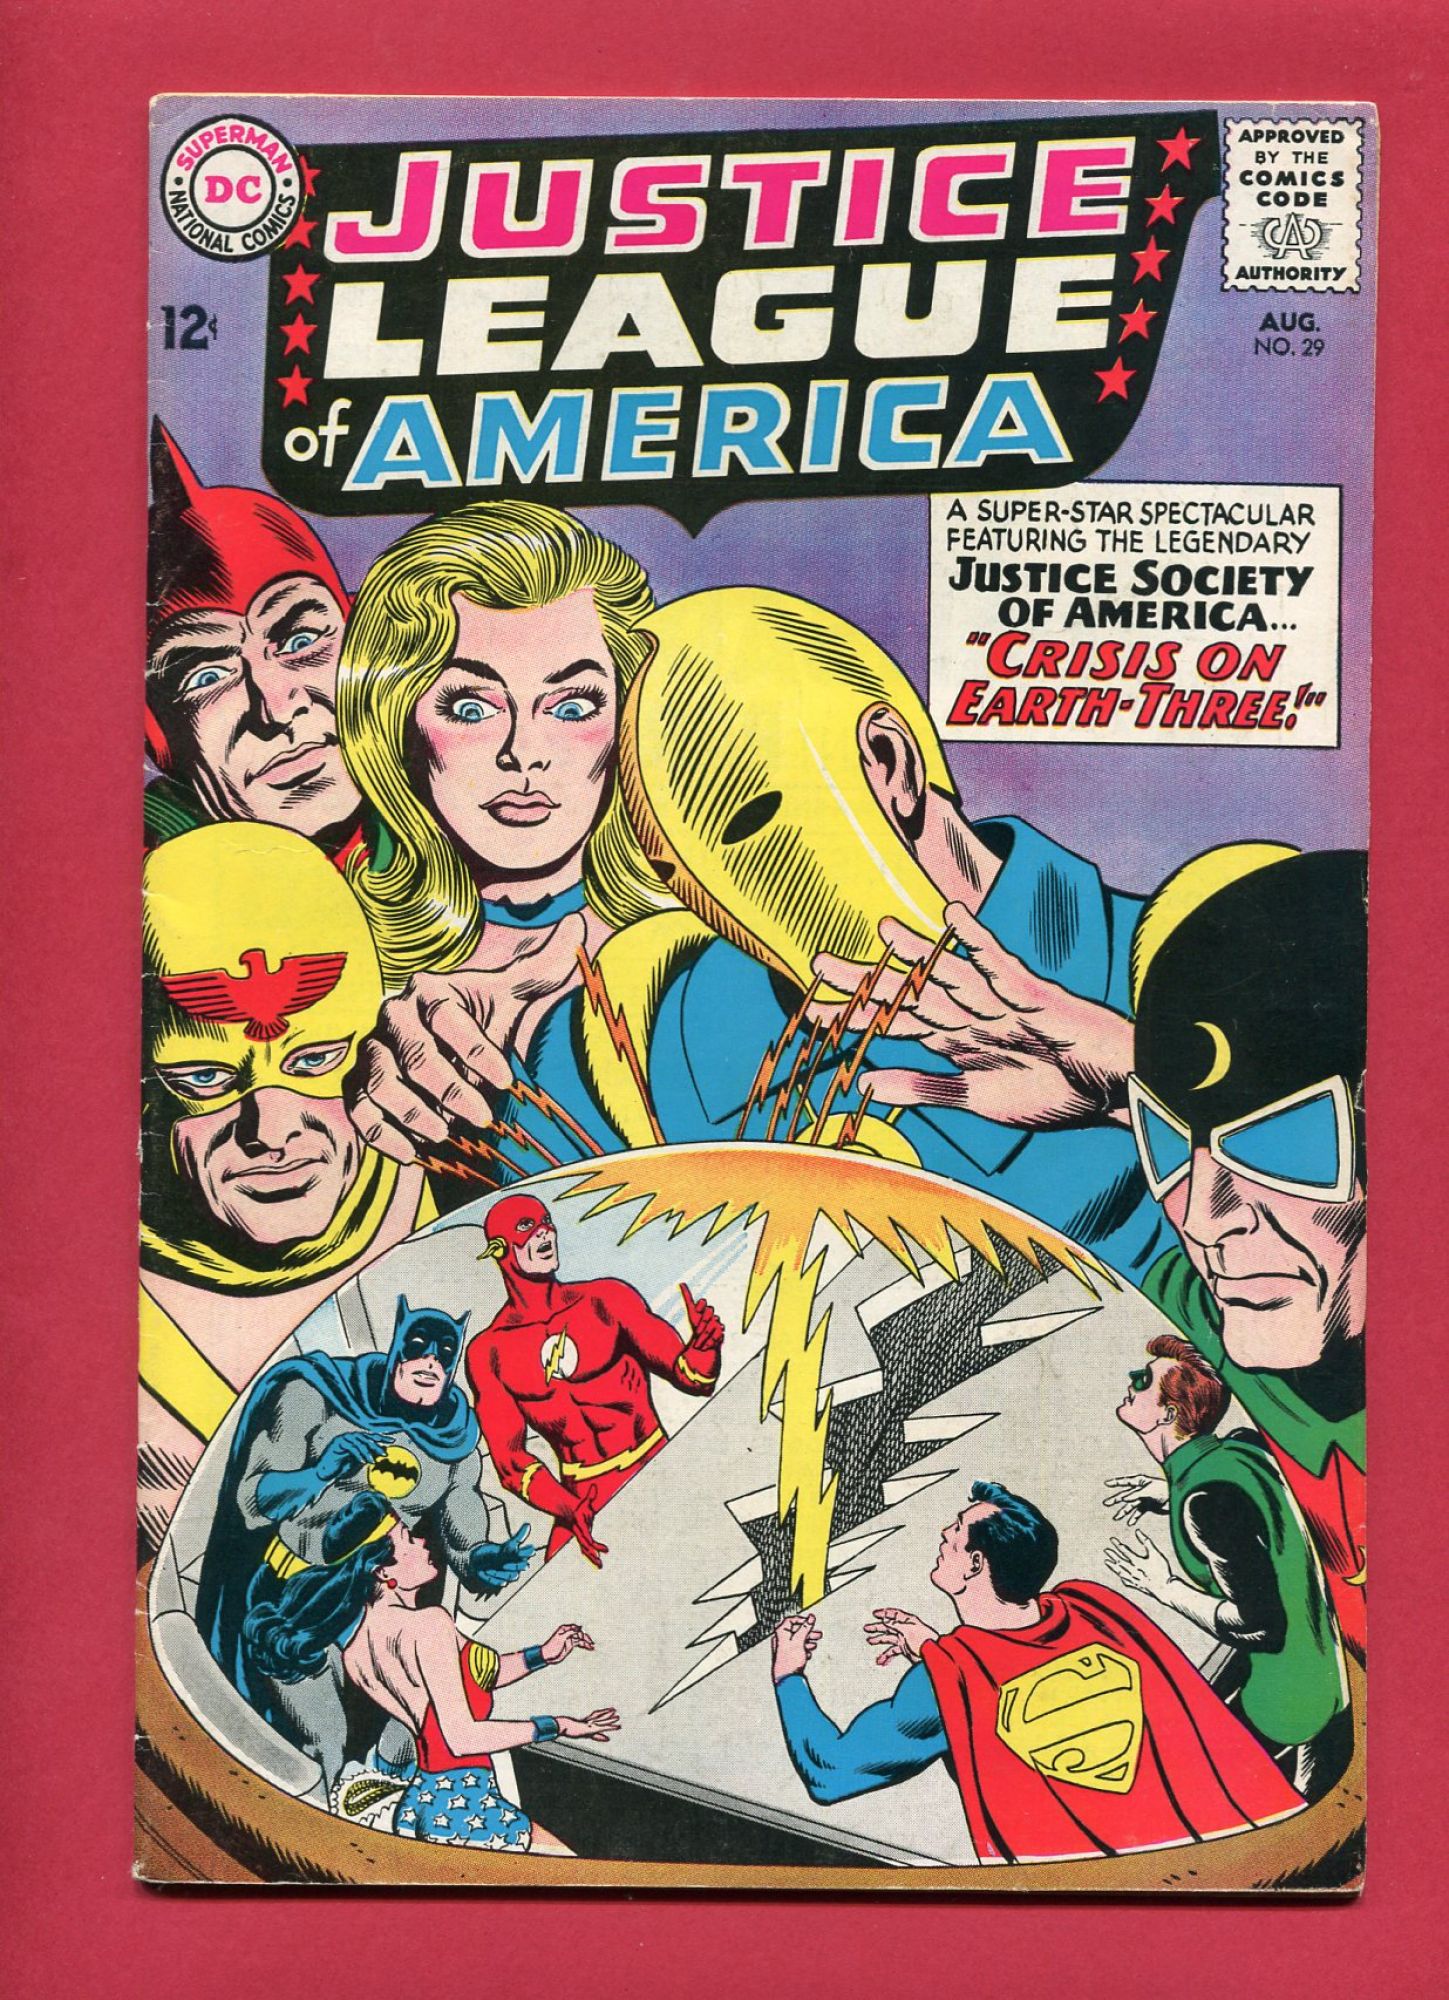 Justice League of America #29, Aug 1964, 5.5 FN-